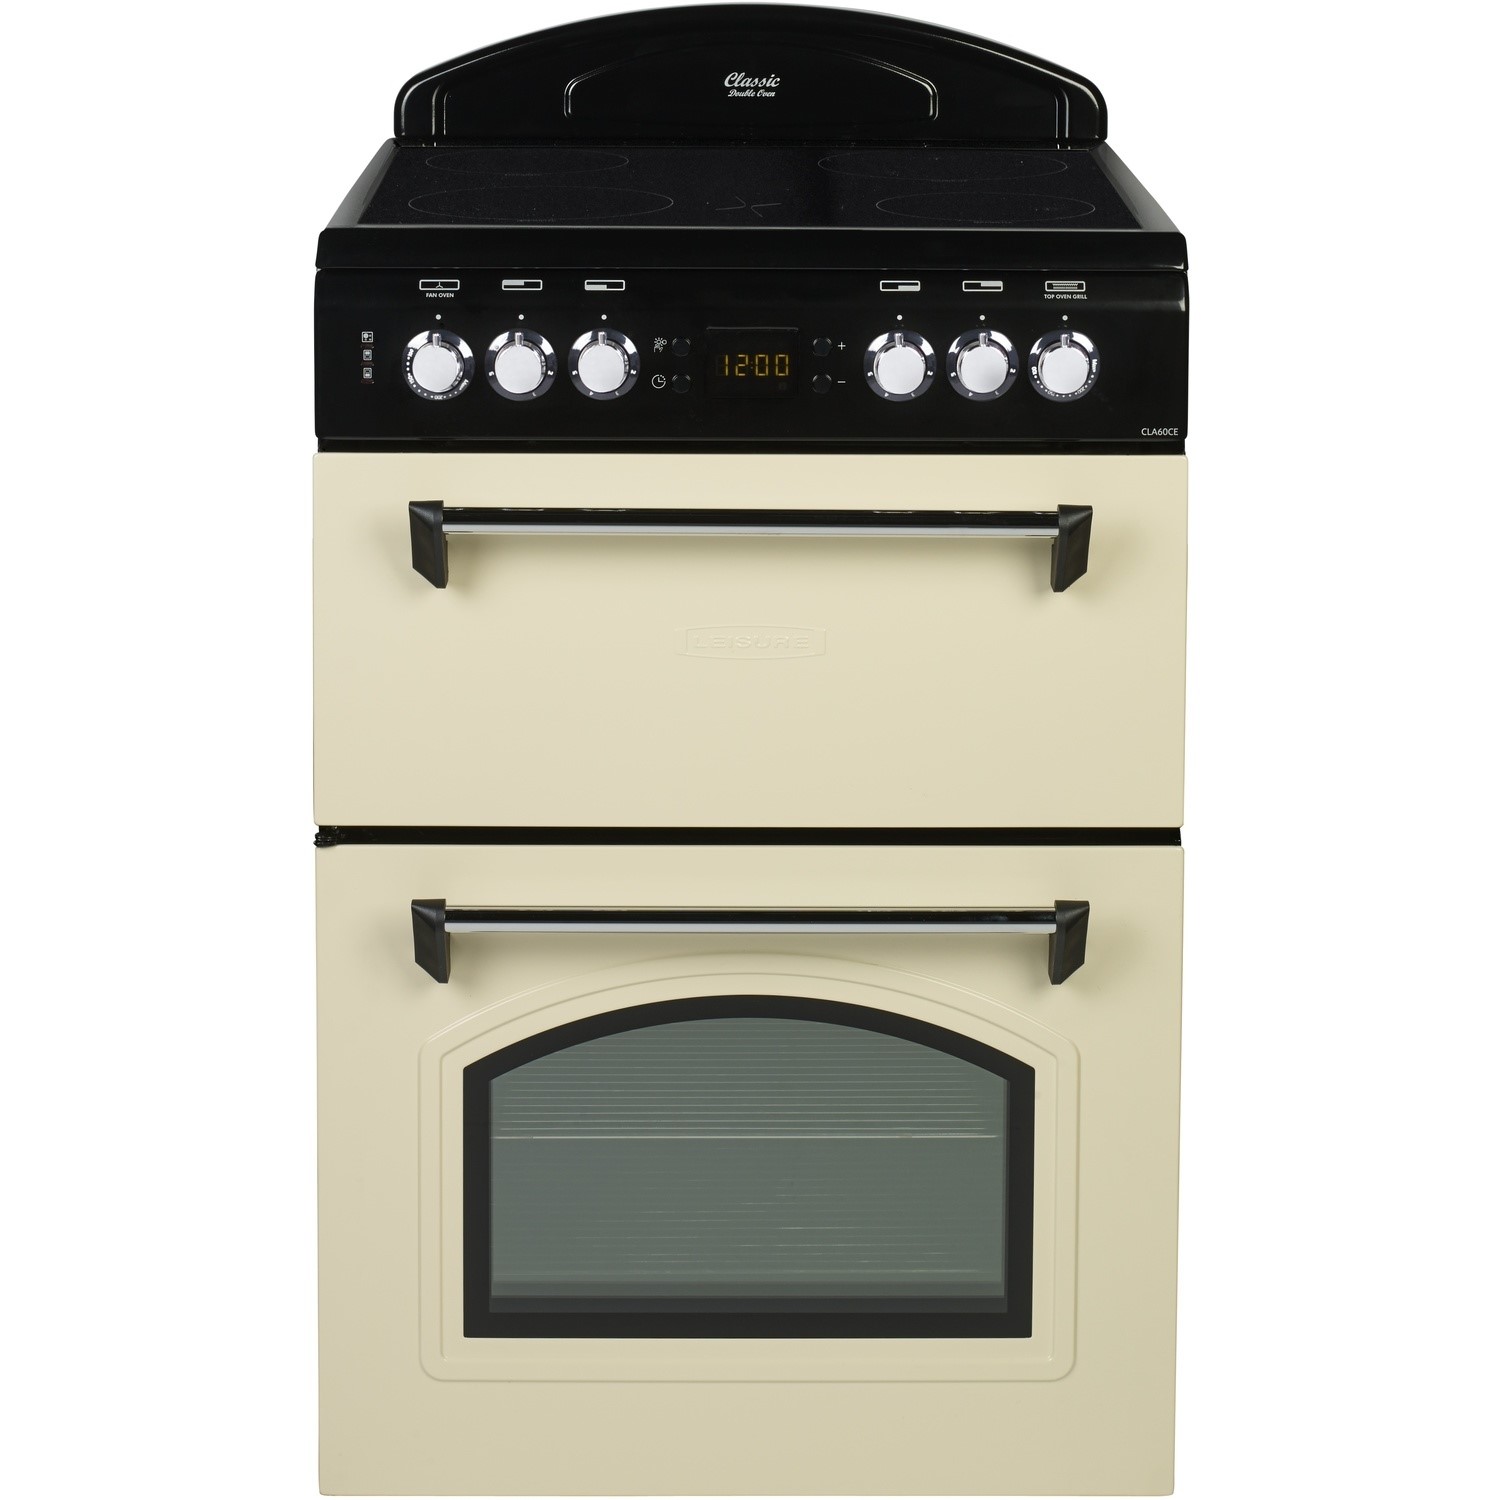 Refurbished Leisure CLA60CEC Classic 60cm Double Oven Electric Cooker With Ceramic Hob Cream